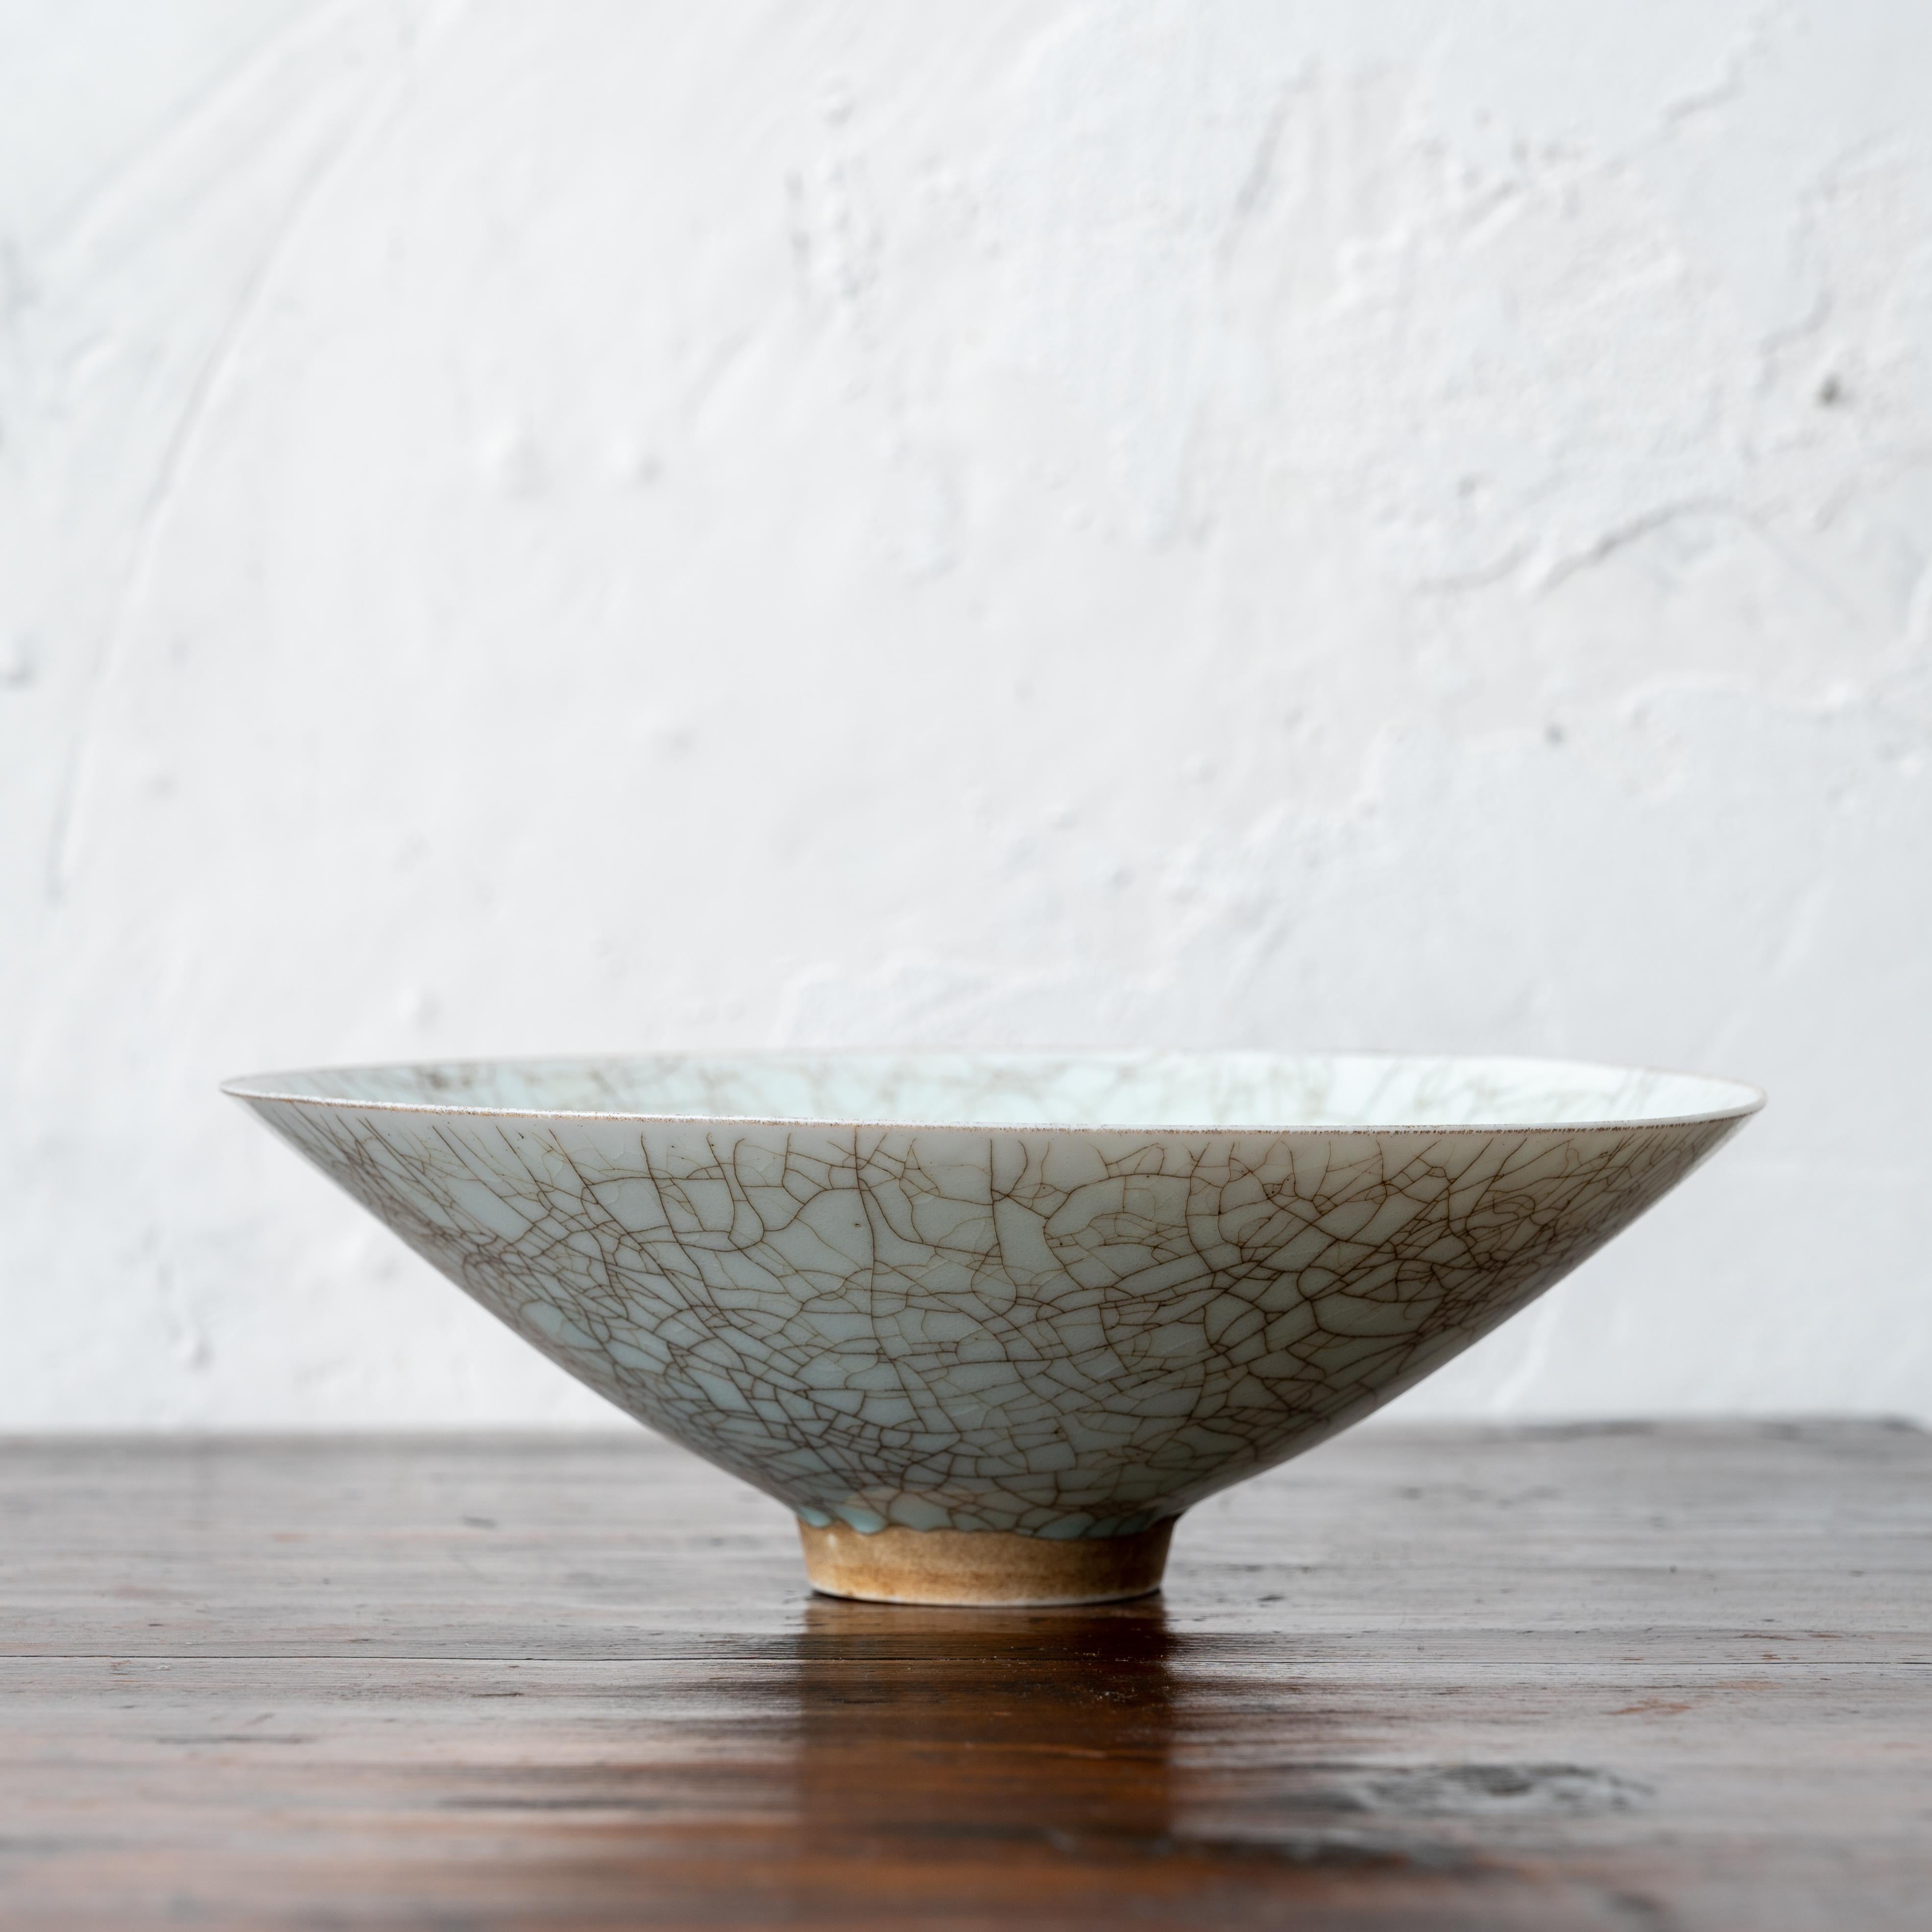 A Longquan style celadon conical bowl with crackled glaze.

7 inches wide by 2 ¼ inches tall

